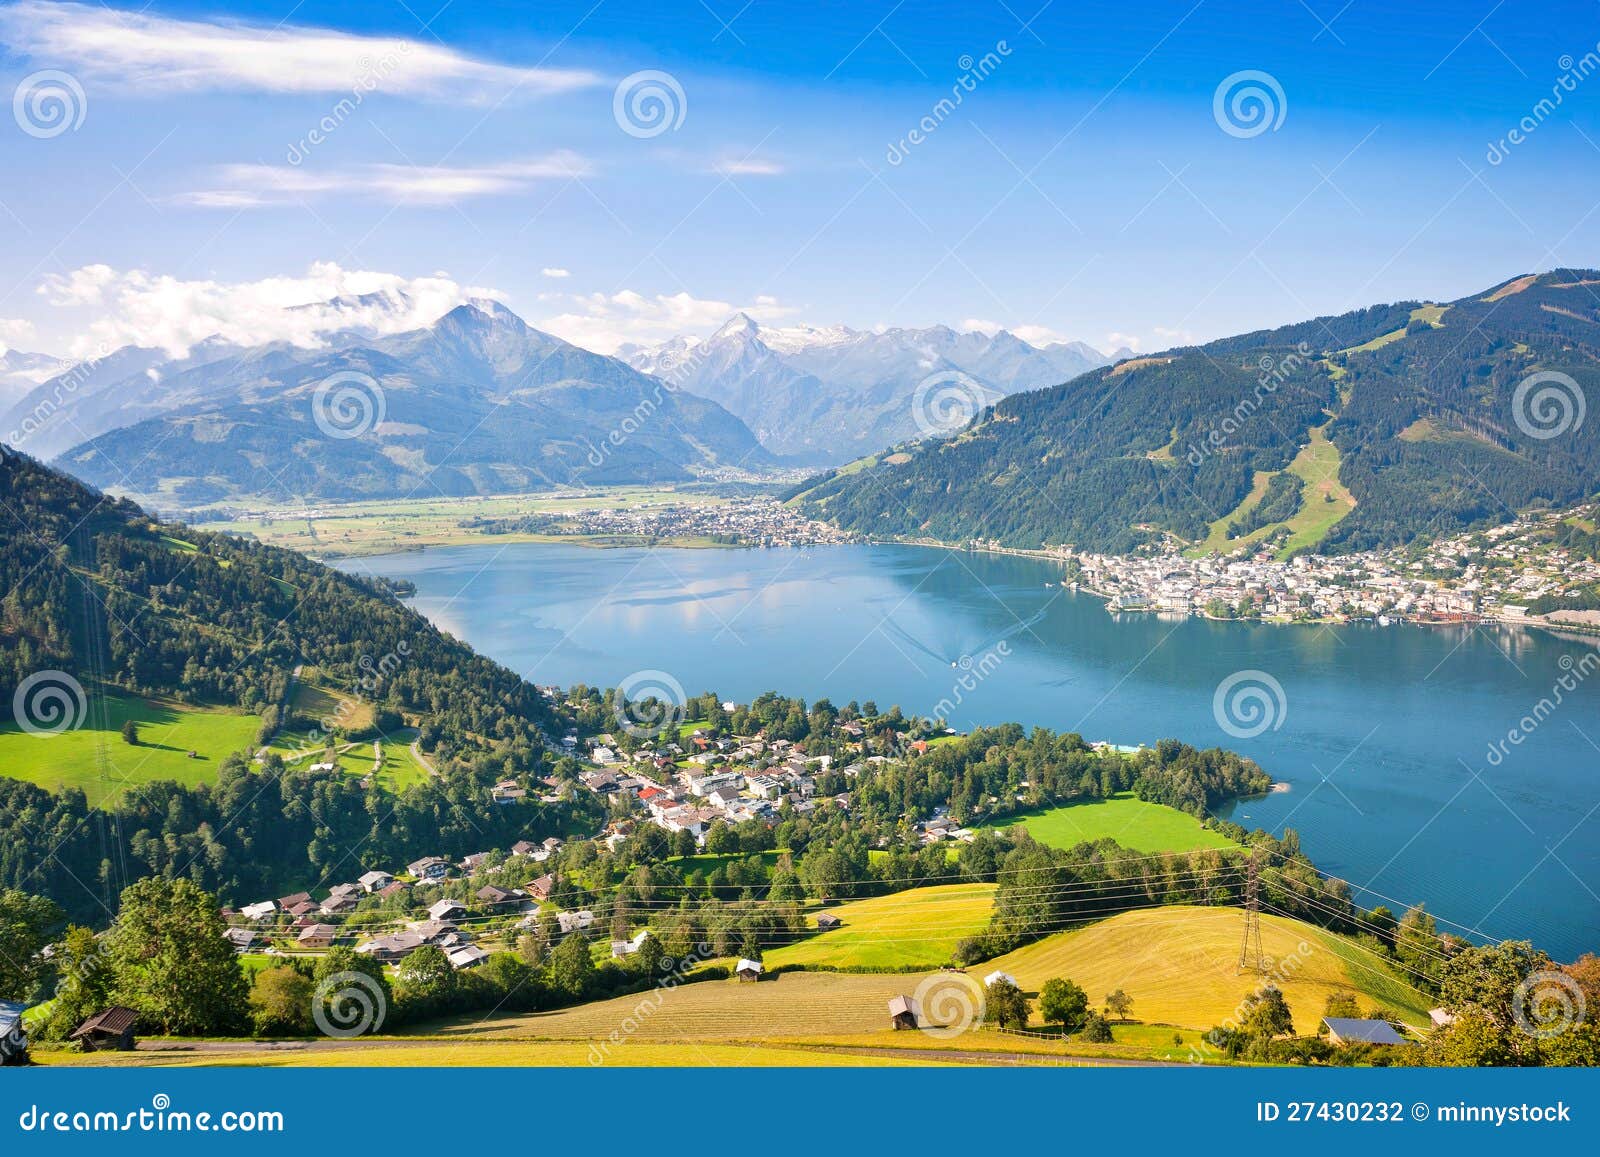 beautiful view of zell am see, austria